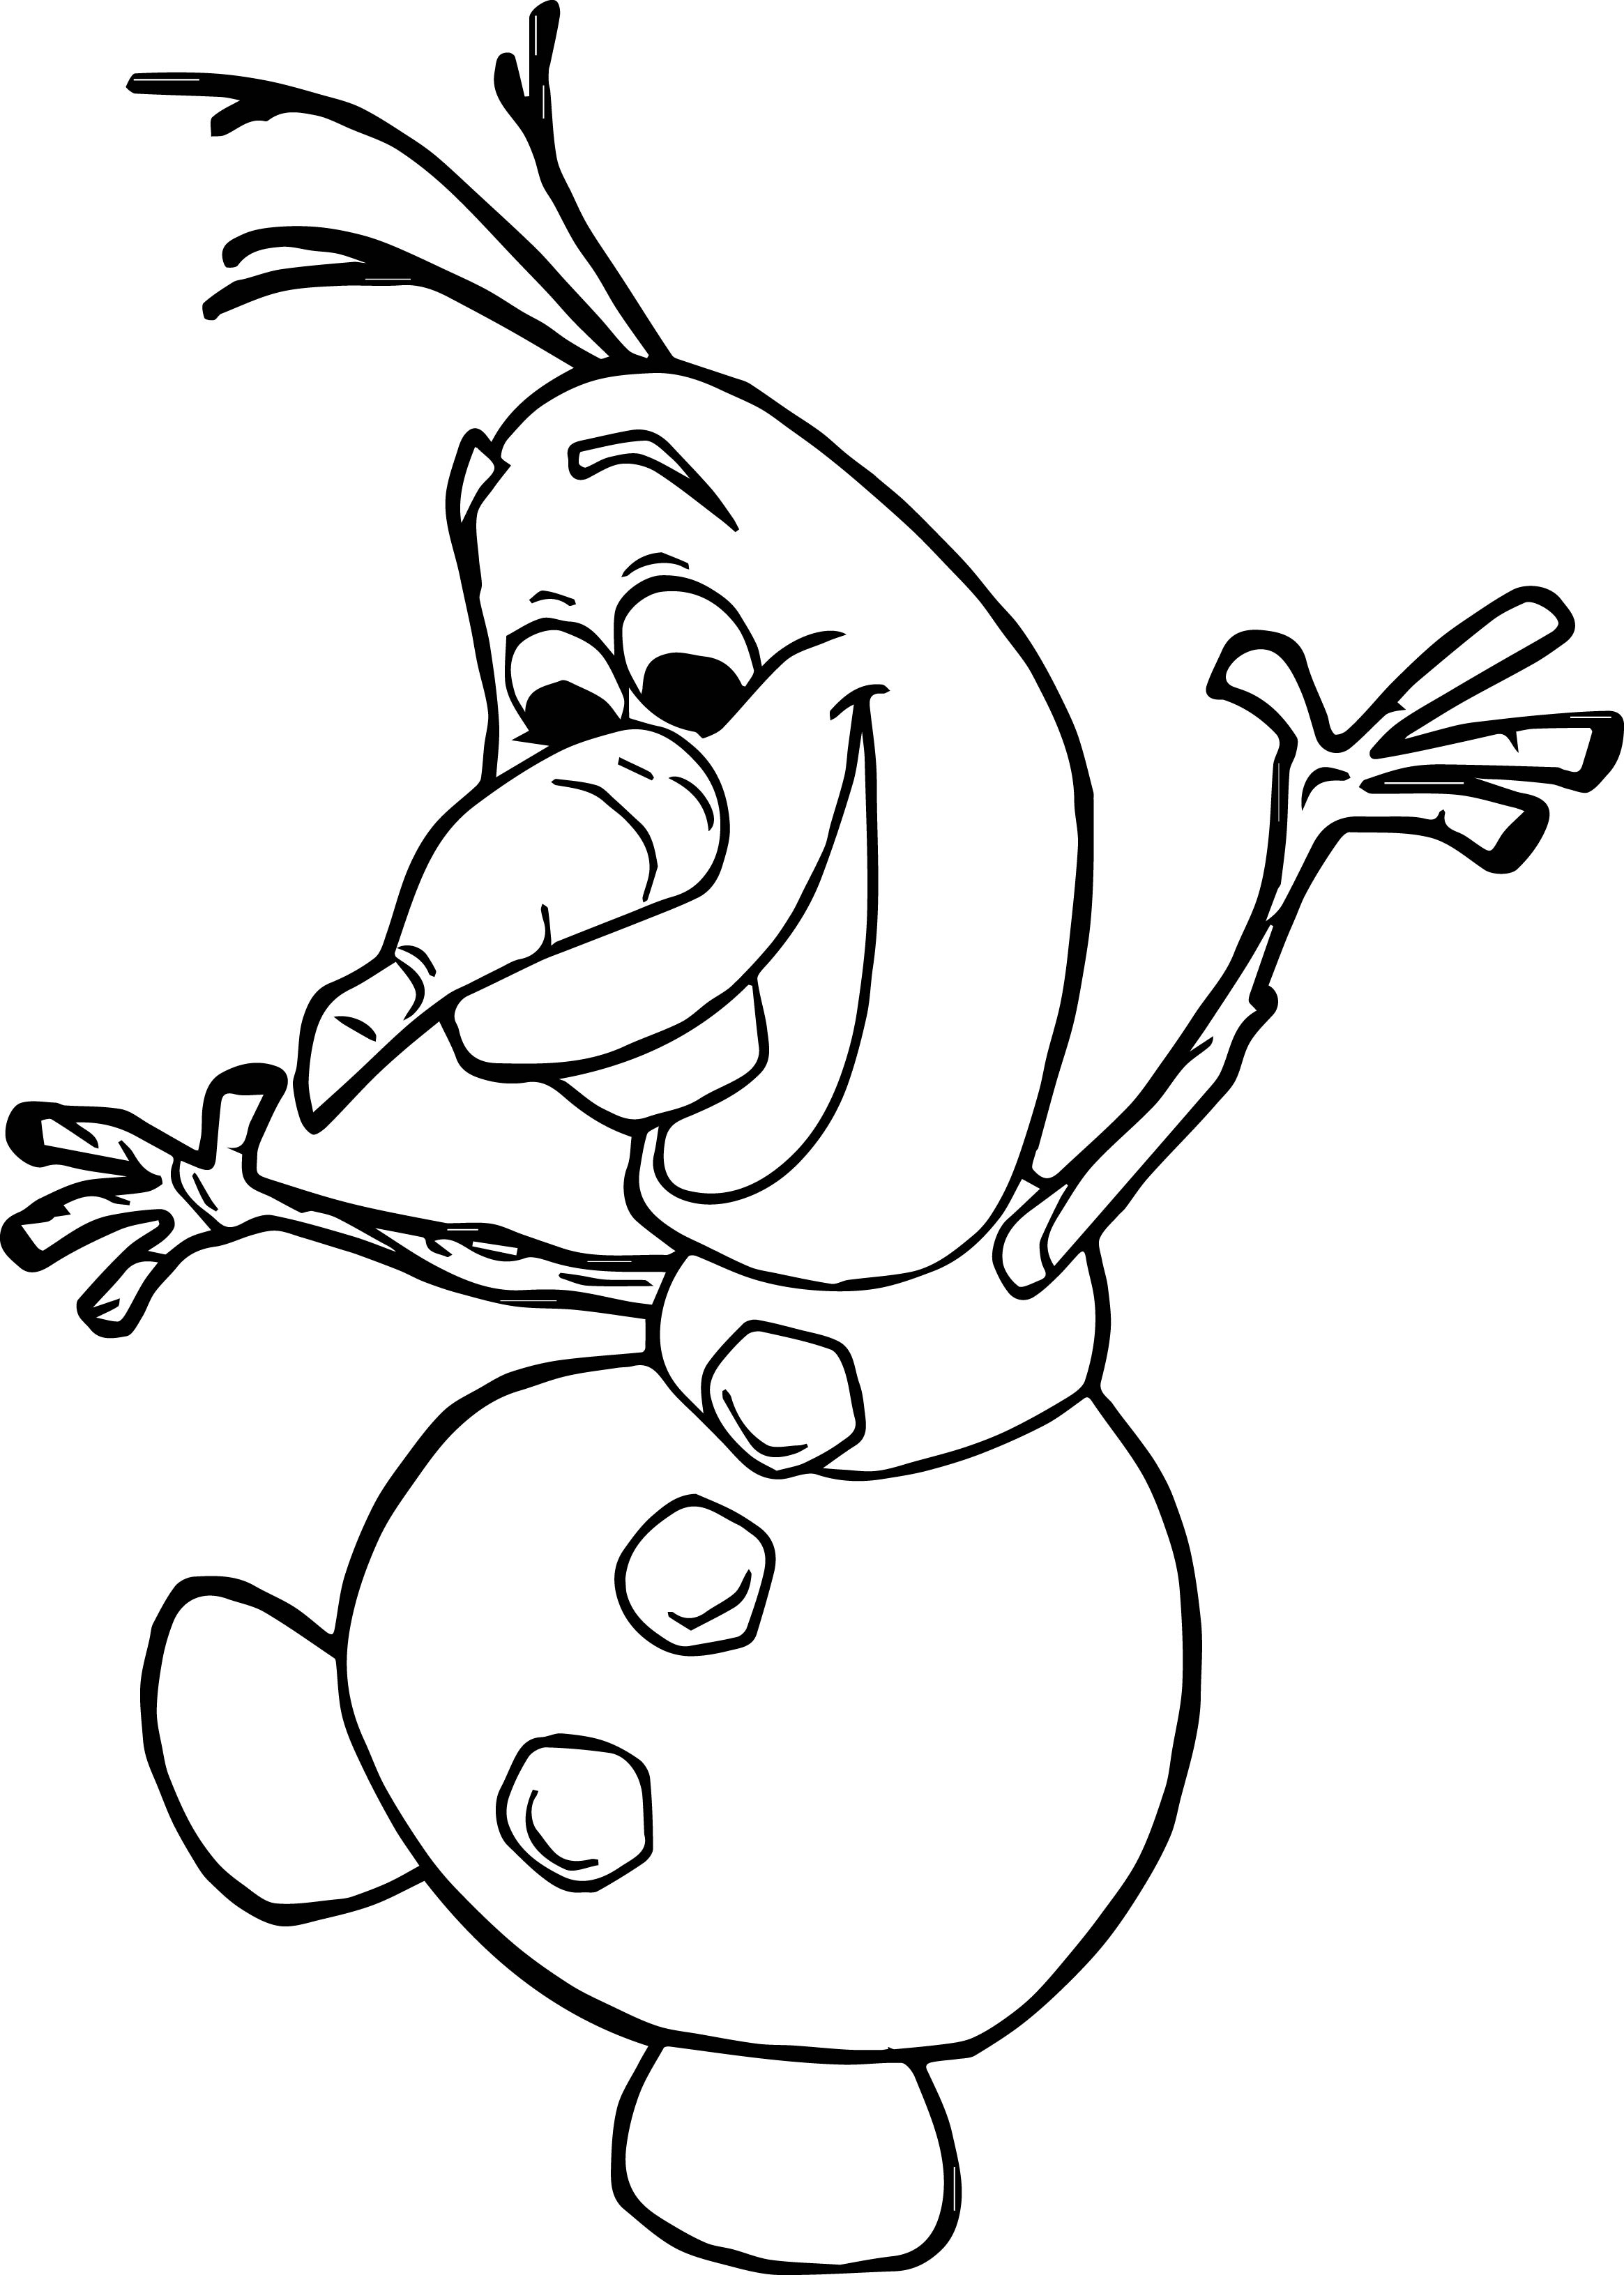 frozen-coloring-pages-free-download-on-clipartmag